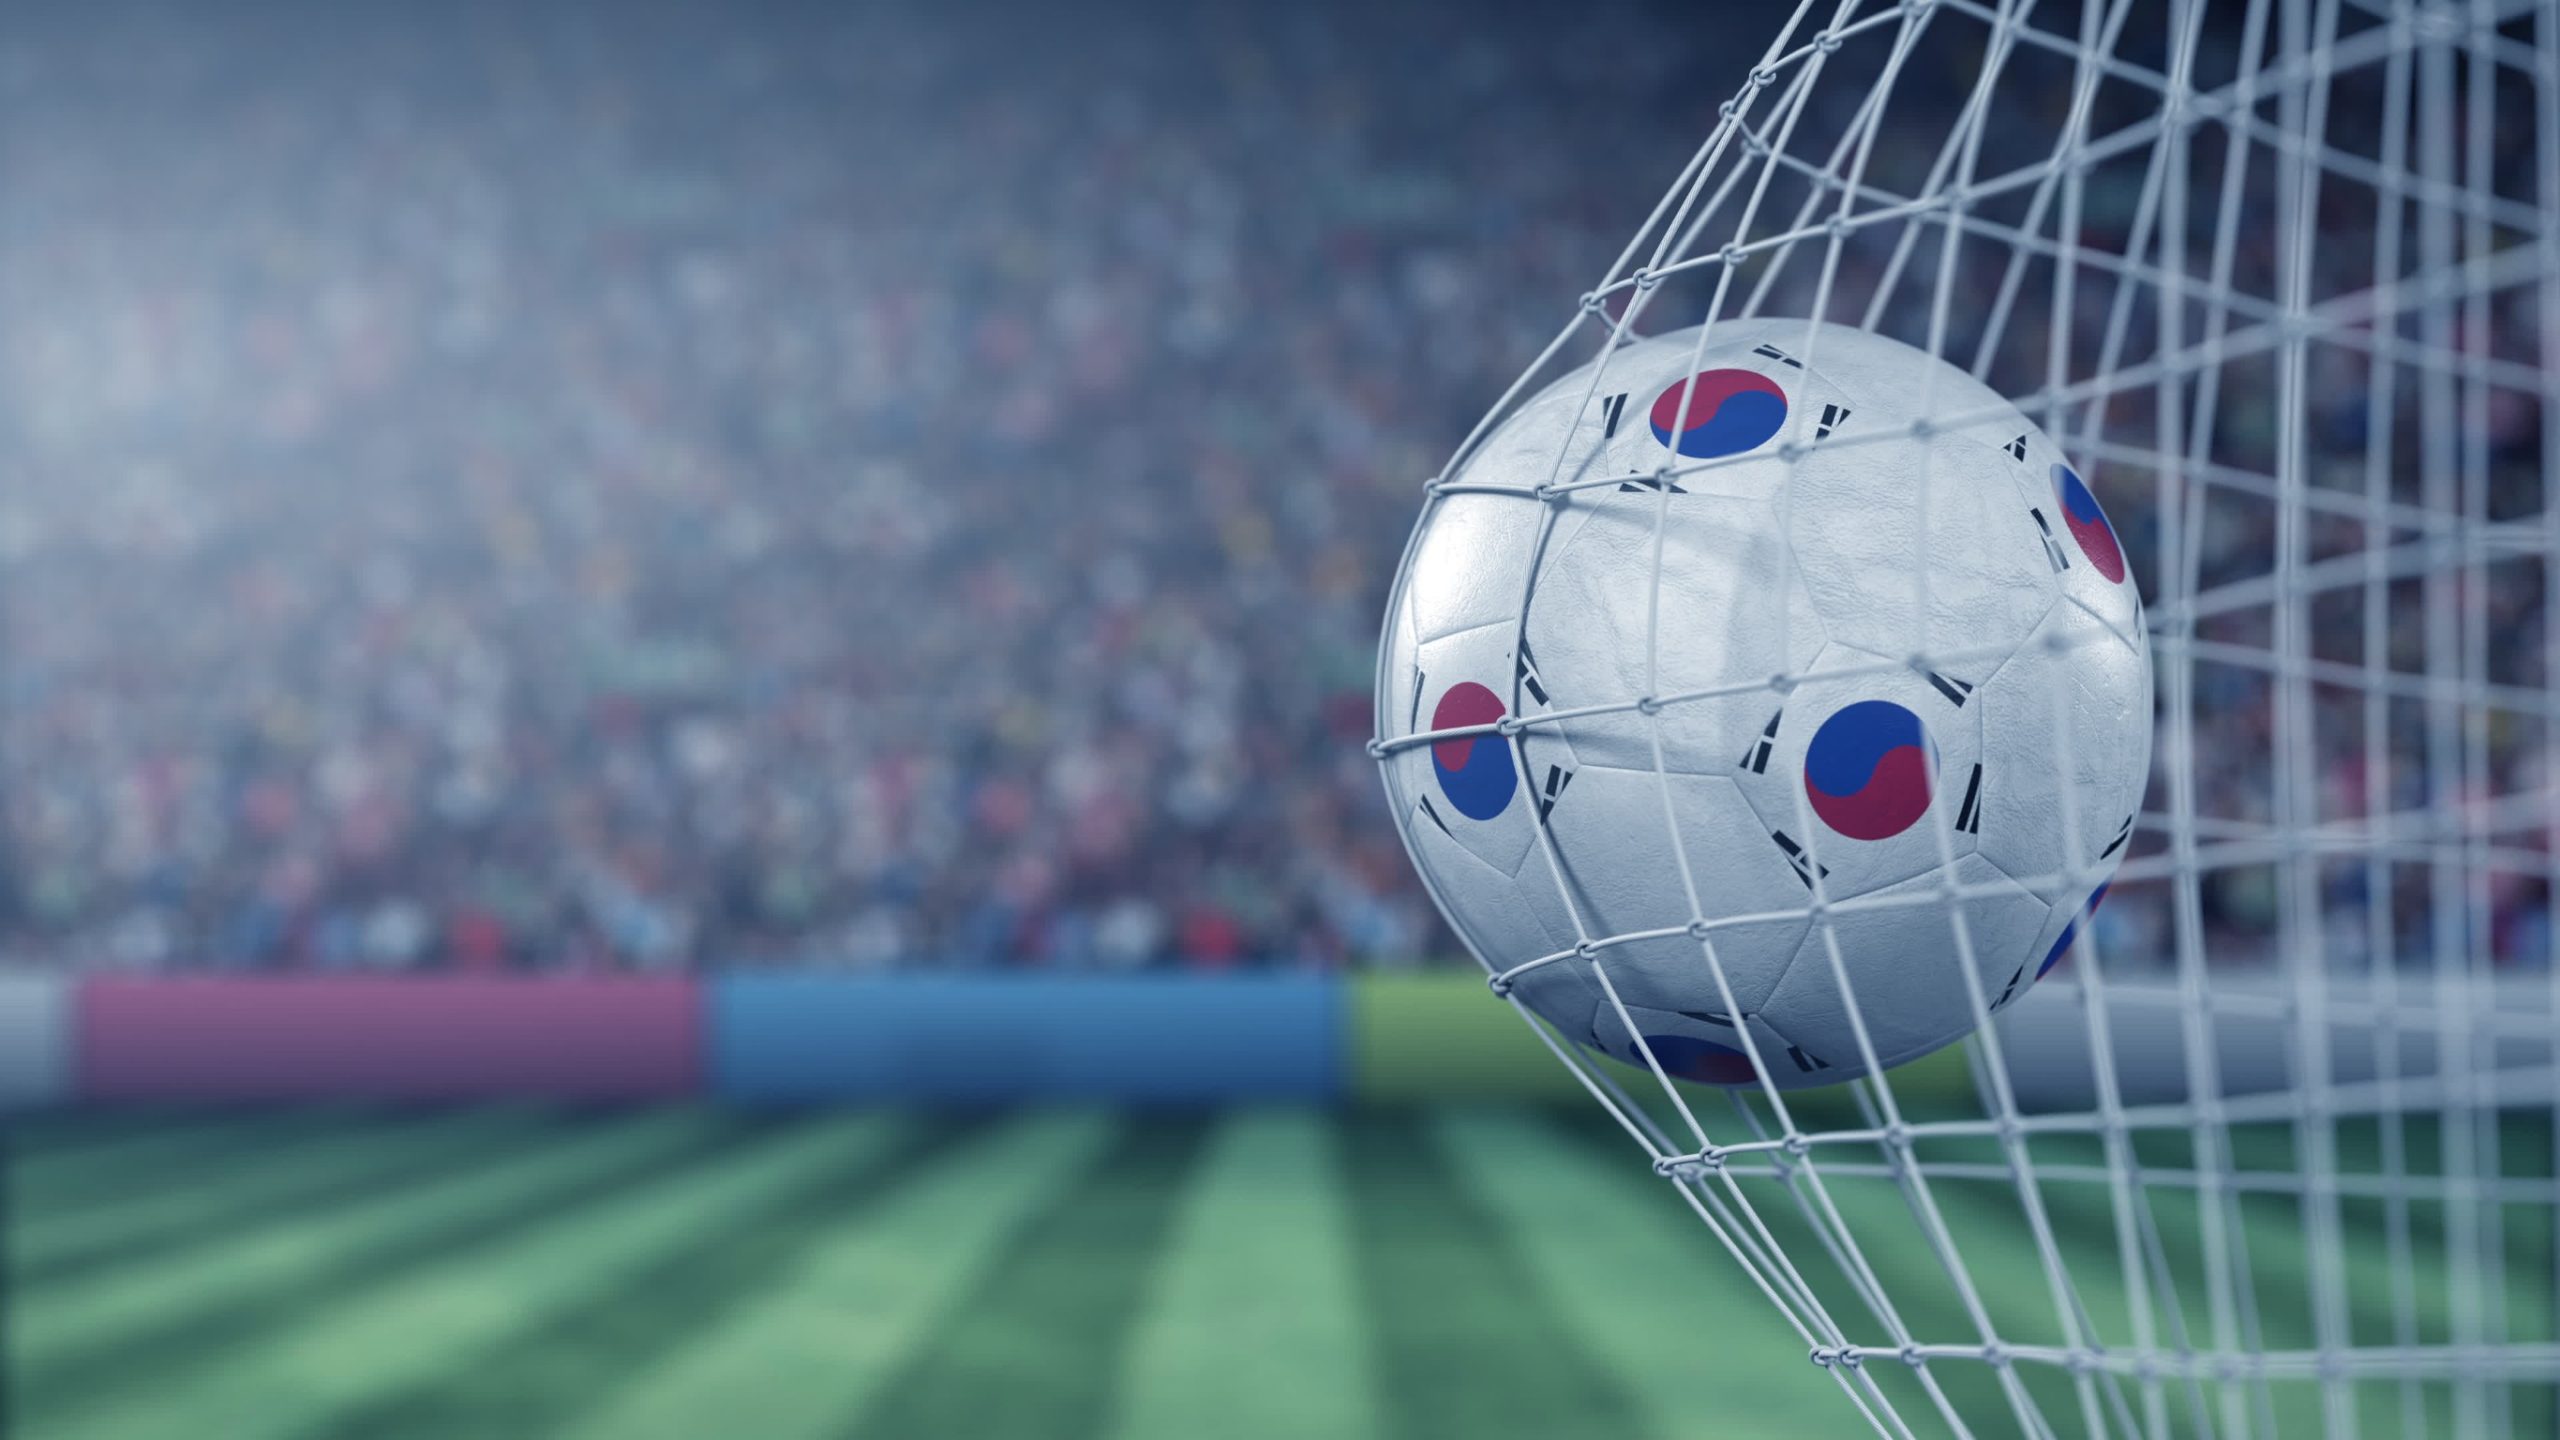 Chiliz Partners with K-League: Introduces ‘K-League Fantasy’ and Welcomes First Sports Organization as Chiliz Chain Validator